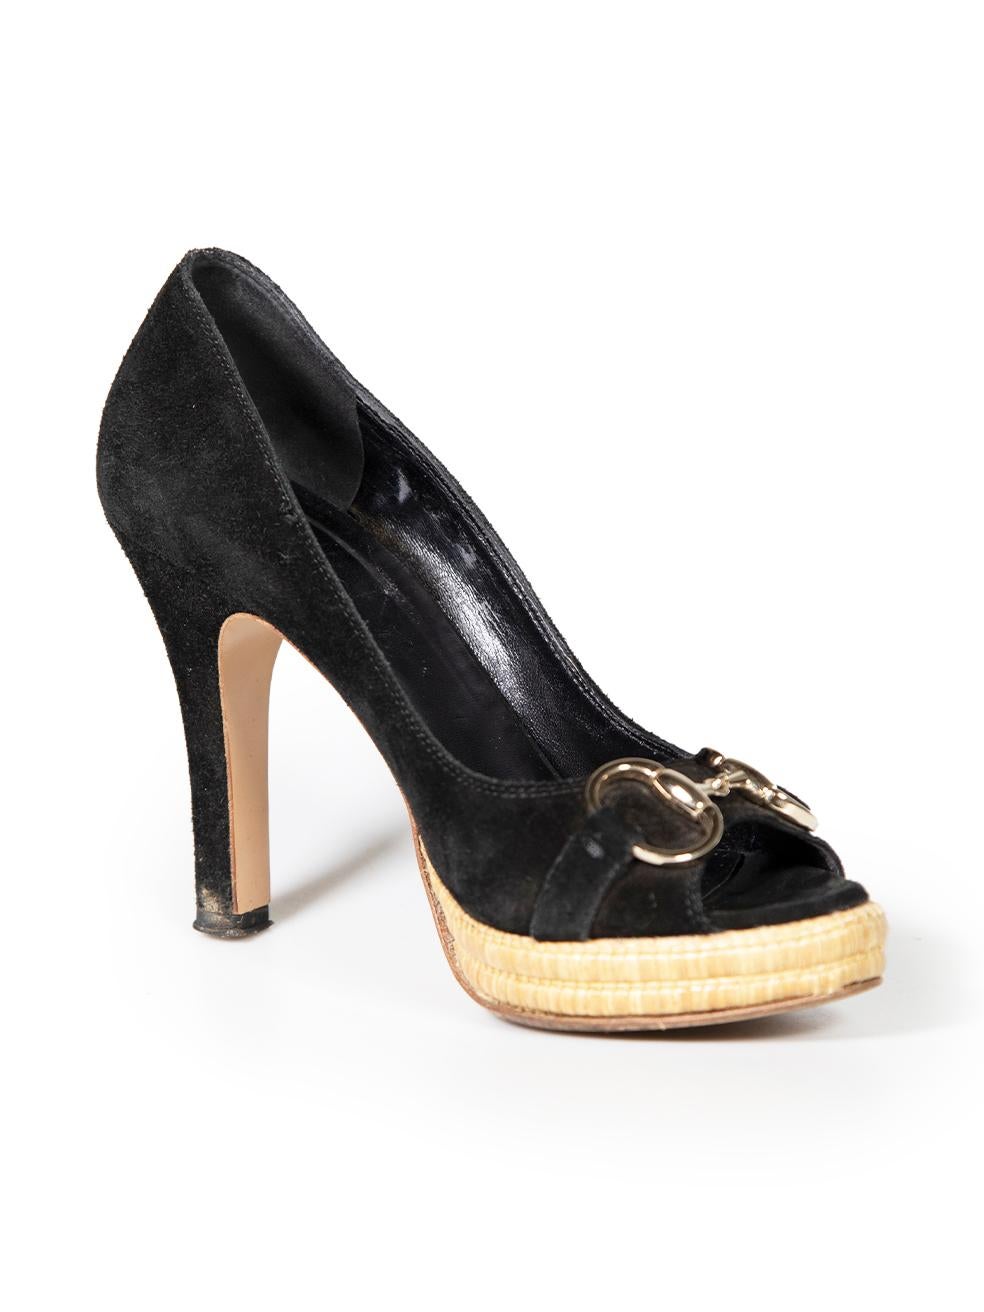 CONDITION is Good. Minor wear to shoes is evident. Light wear to both shoe heels and the right shoe toe with abrasions to the suede. The right shoe platform has also come slightly unravelled at the toe on this used Gucci designer resale item. These